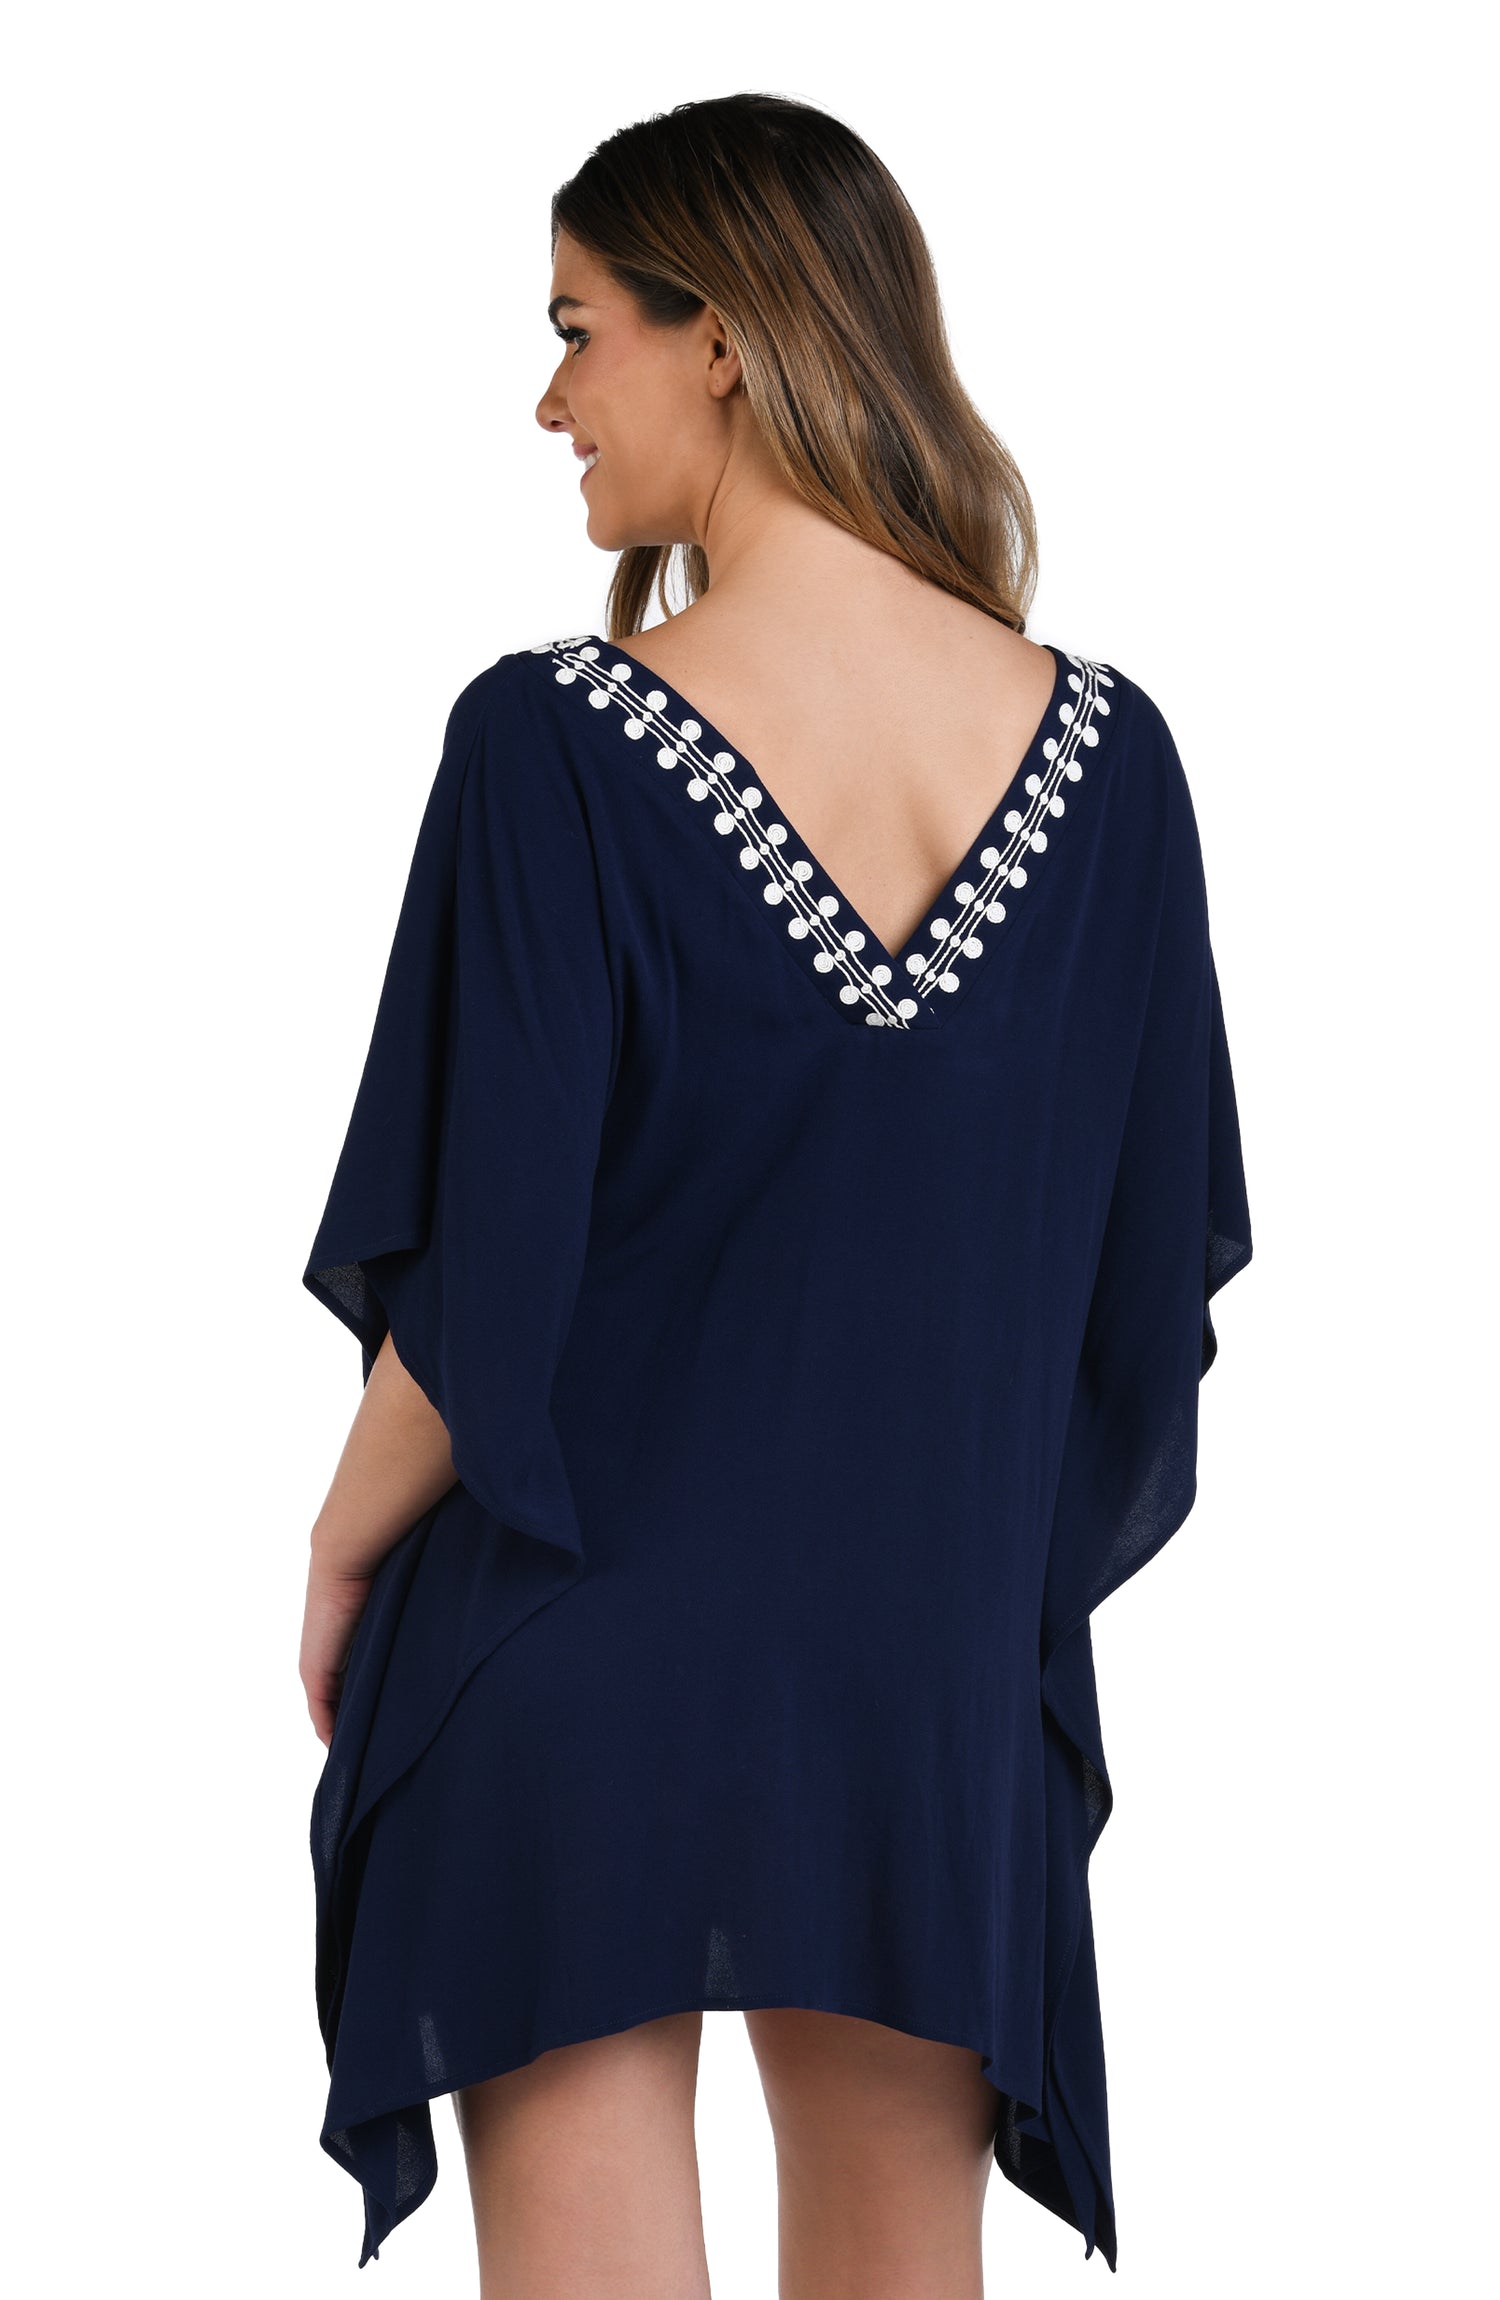 Model is wearing an indigo and white patterned tunic cover up that resembles a string of white sea scallop shells.